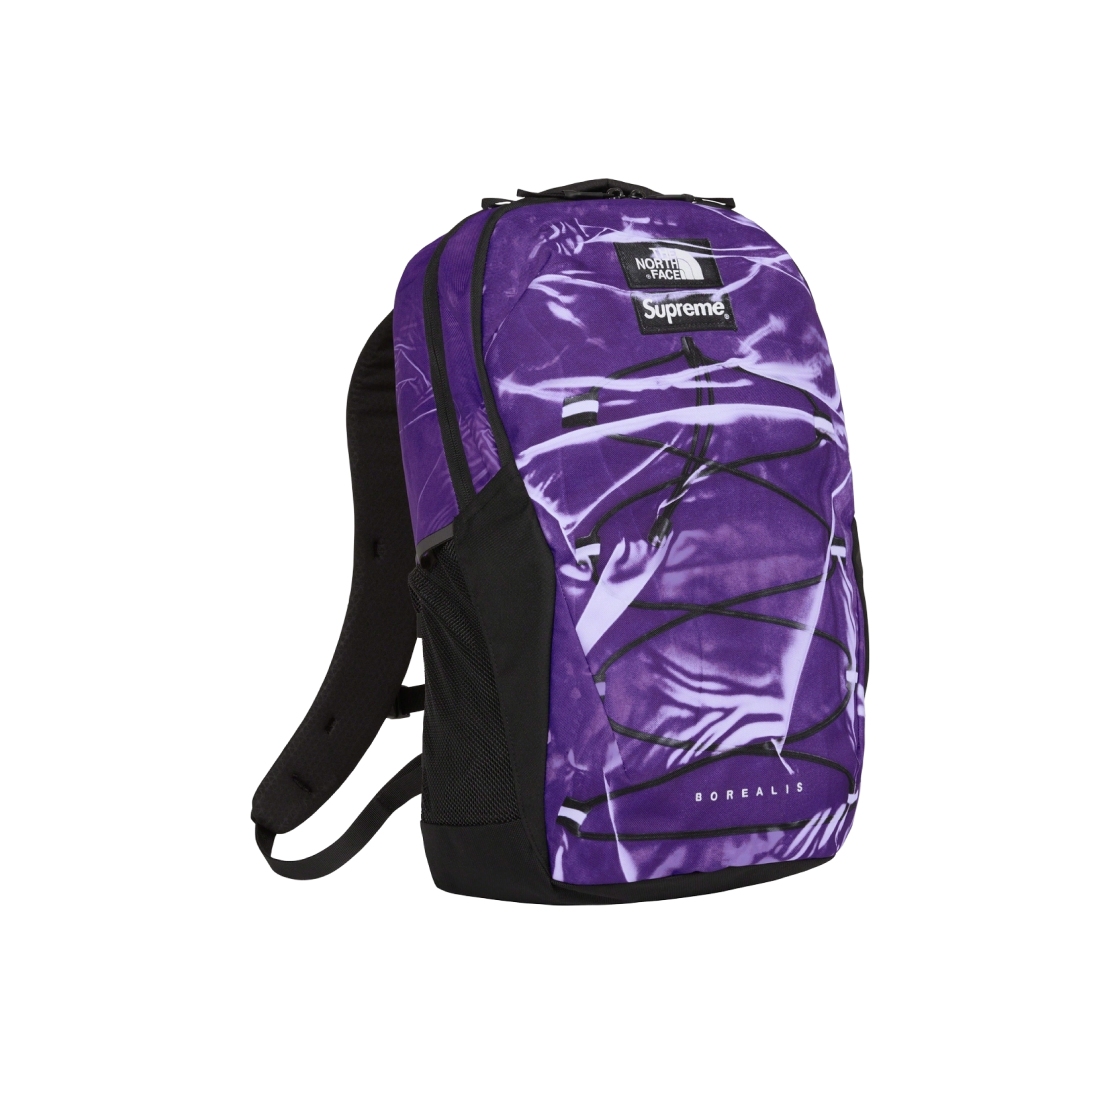 Supreme x The North Face Trompe L oeil Printed Borealis Backpack